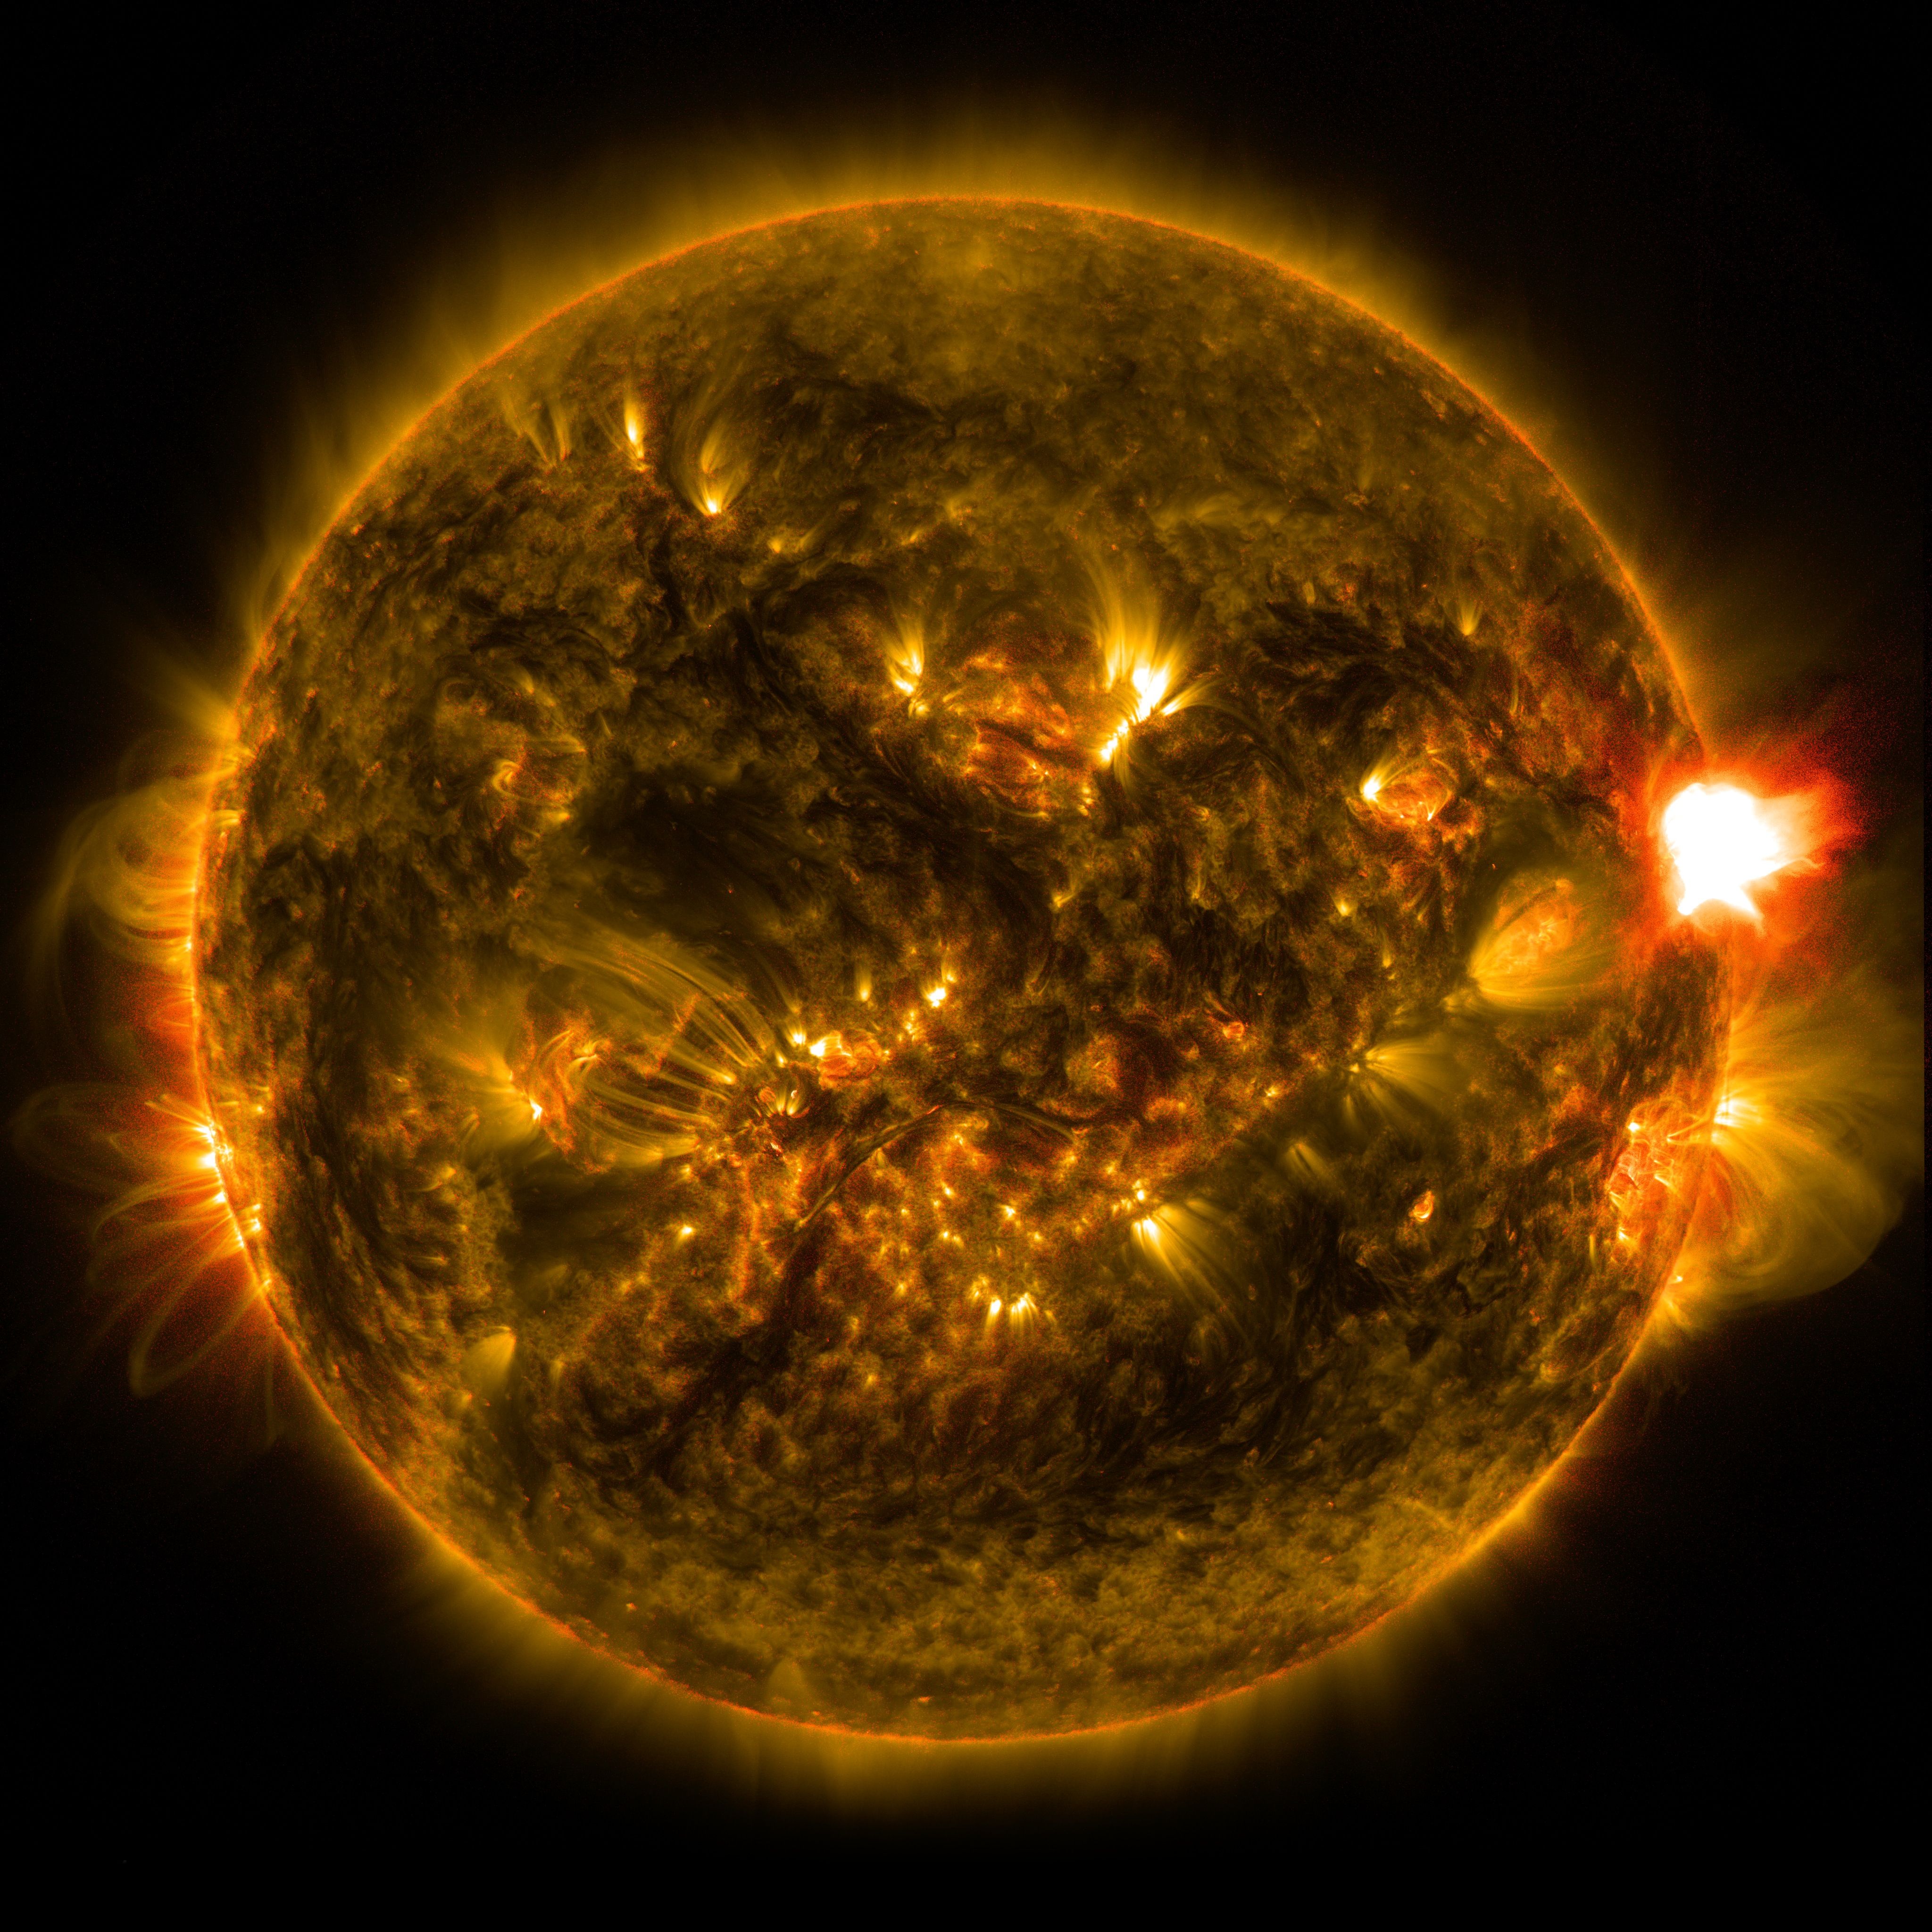 NASA Releases Image of 1st Notable Solar Flare of 2015